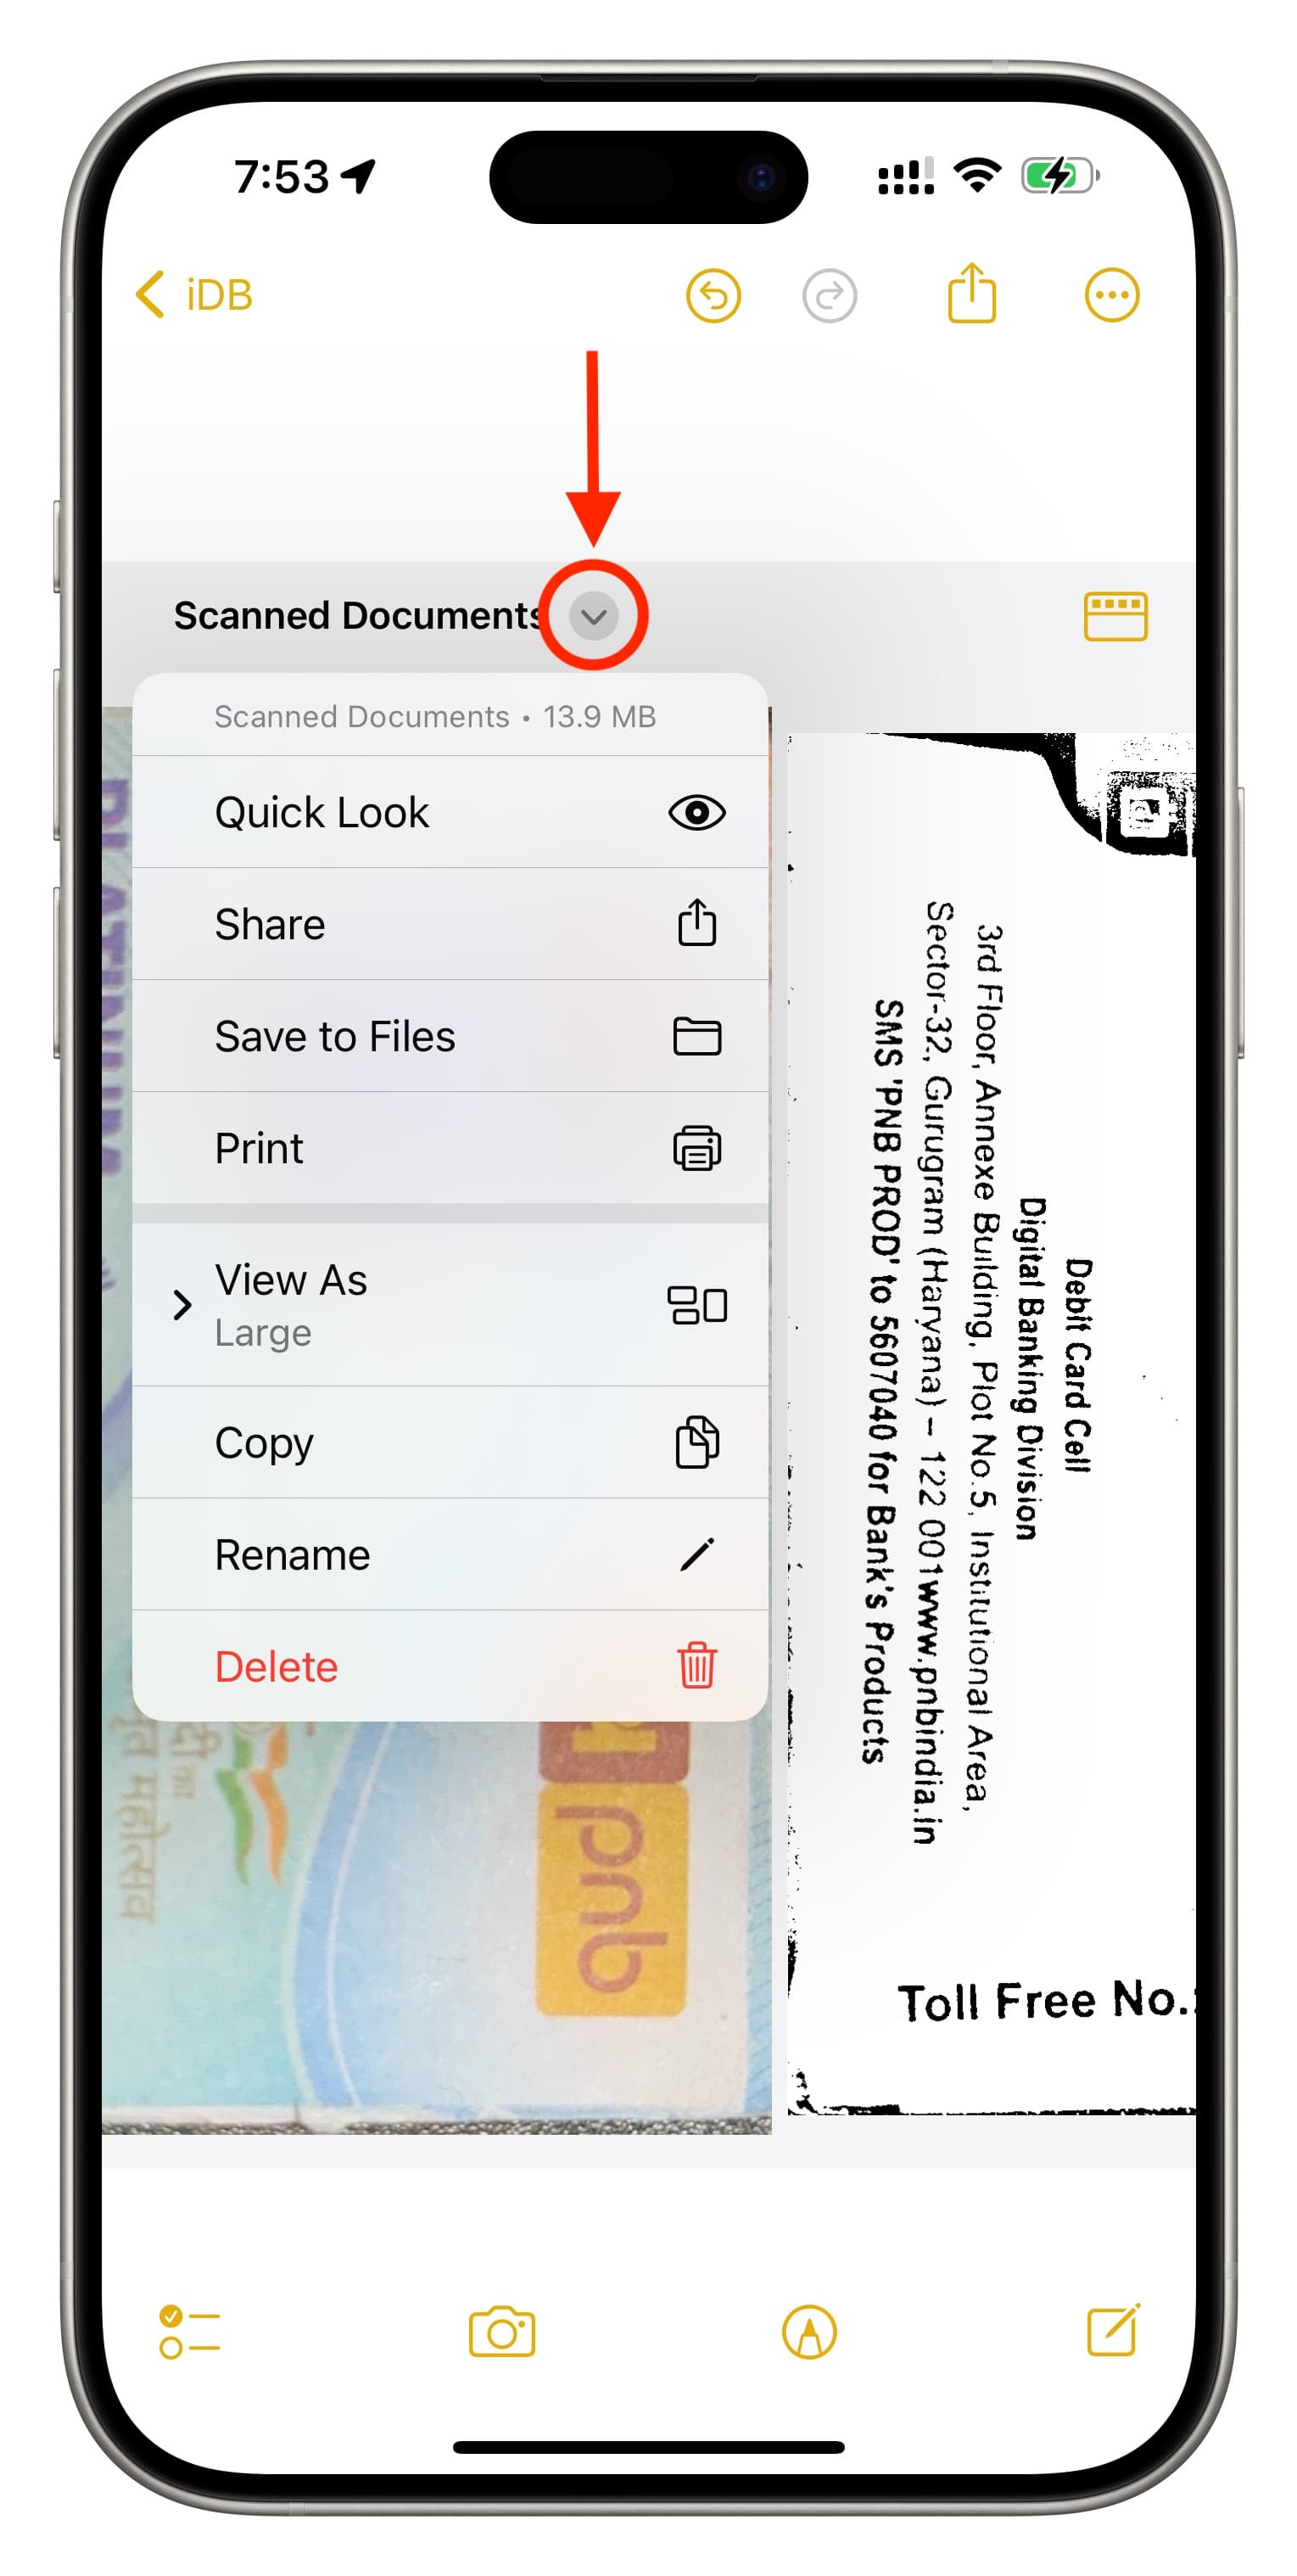 Manage scanned documents bundle in iPhone Notes app